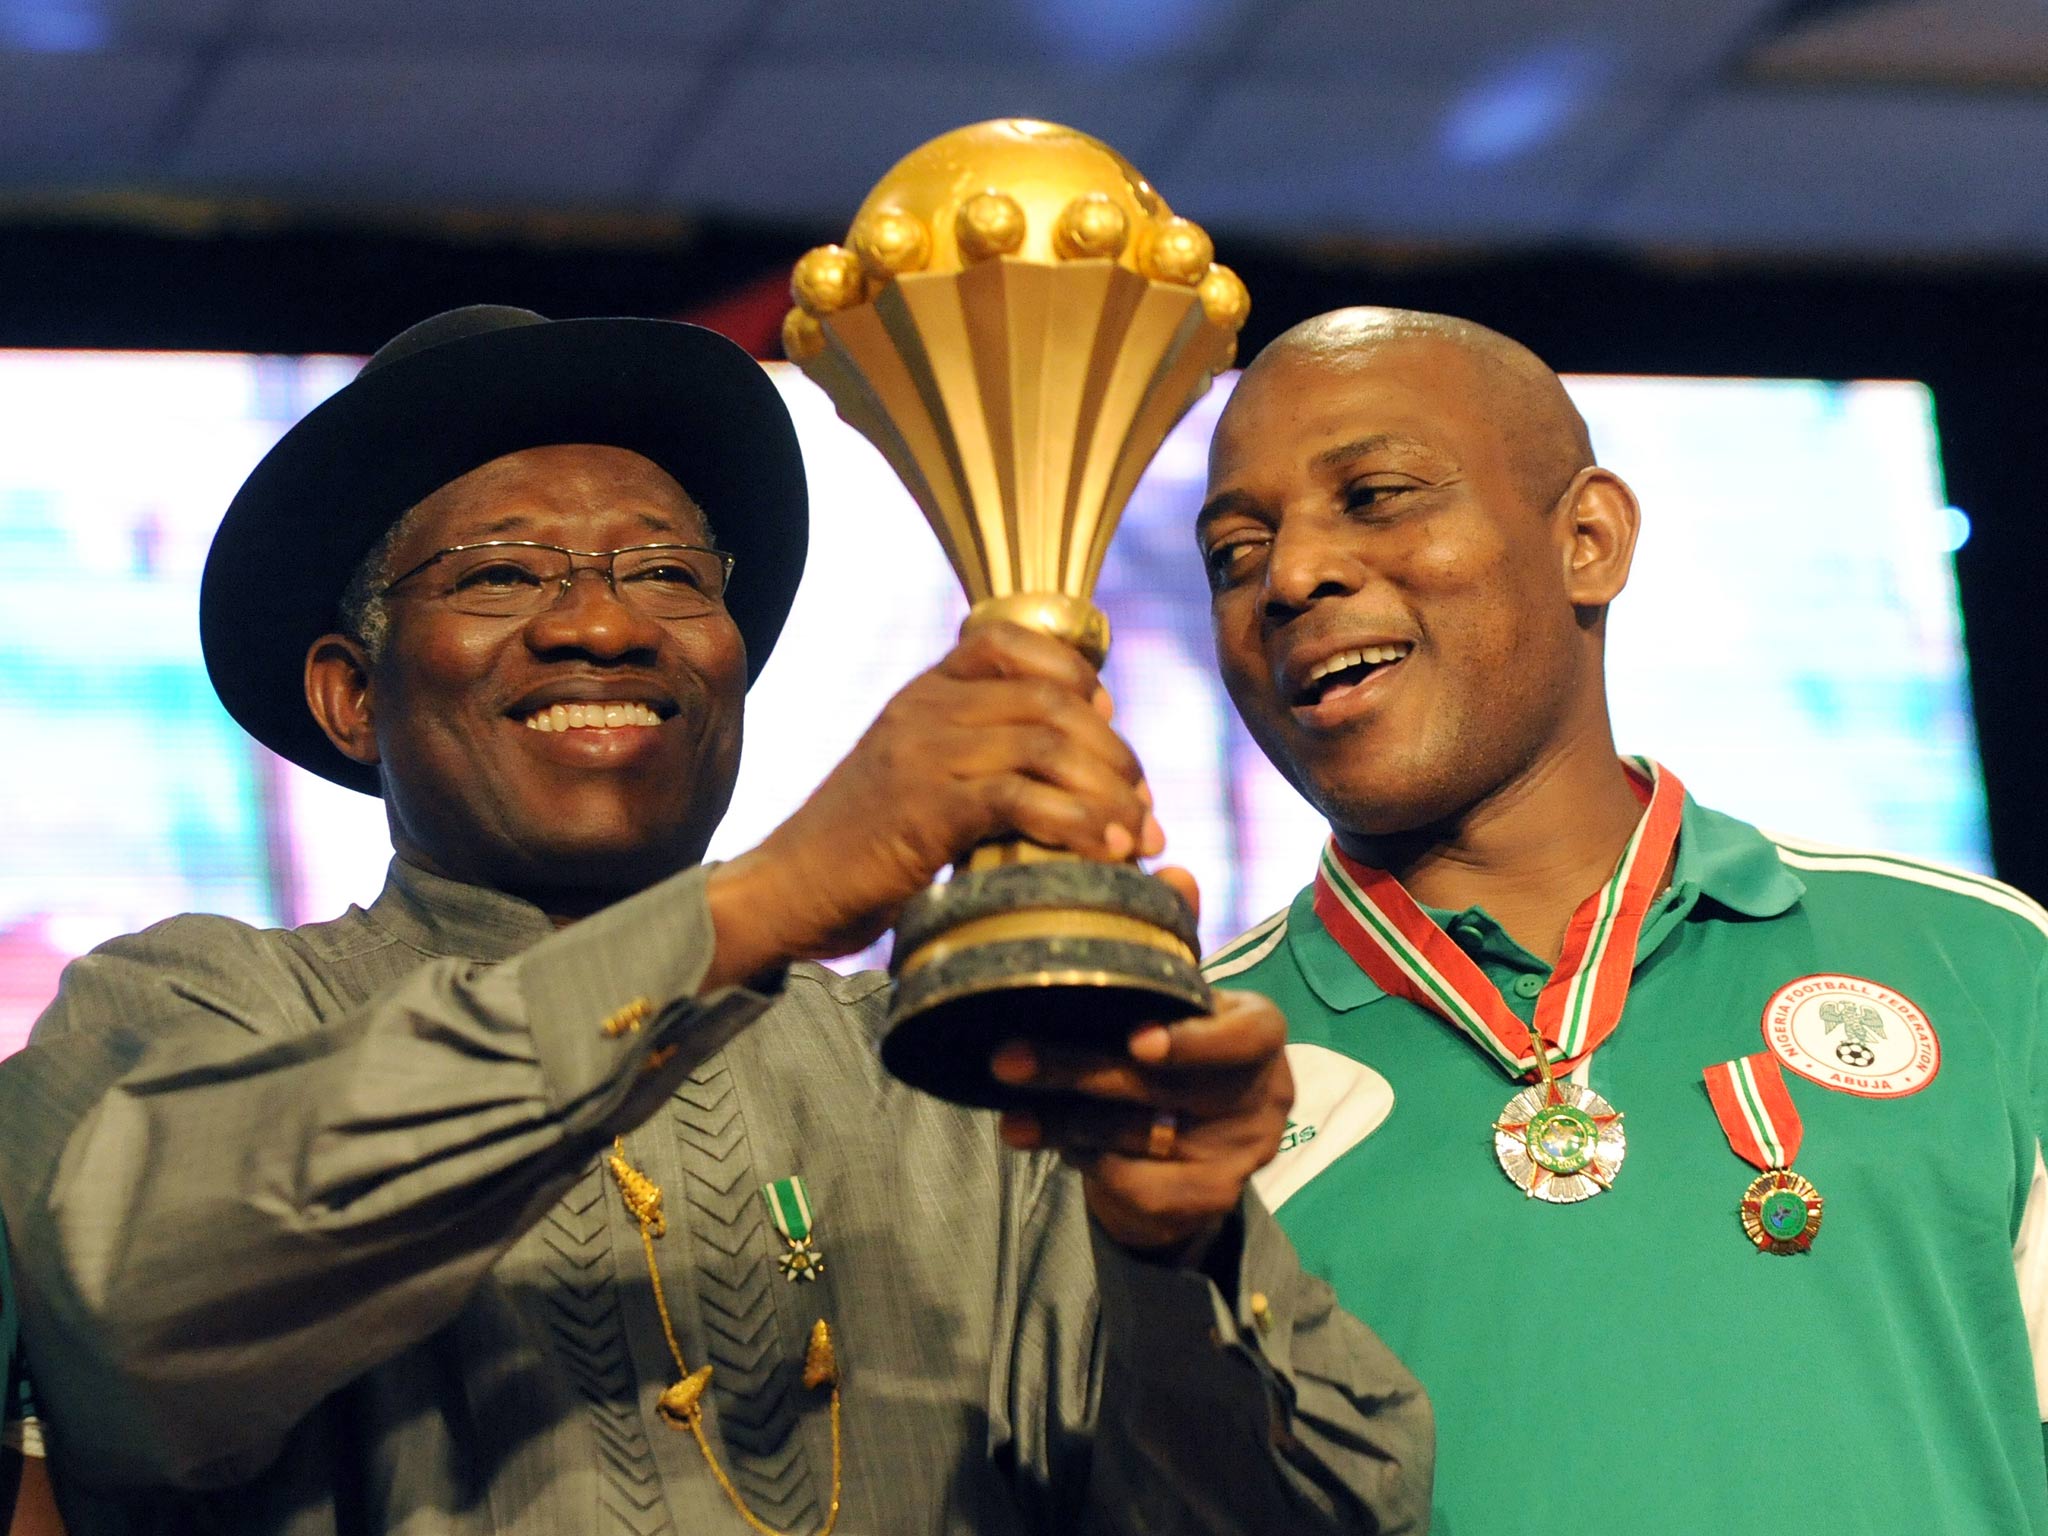 Coach of the mens Nigerian football team Stephen Keshi looks on as President Goodluck Jonathan raises the trophy won at the 2013 African Cup of Nations